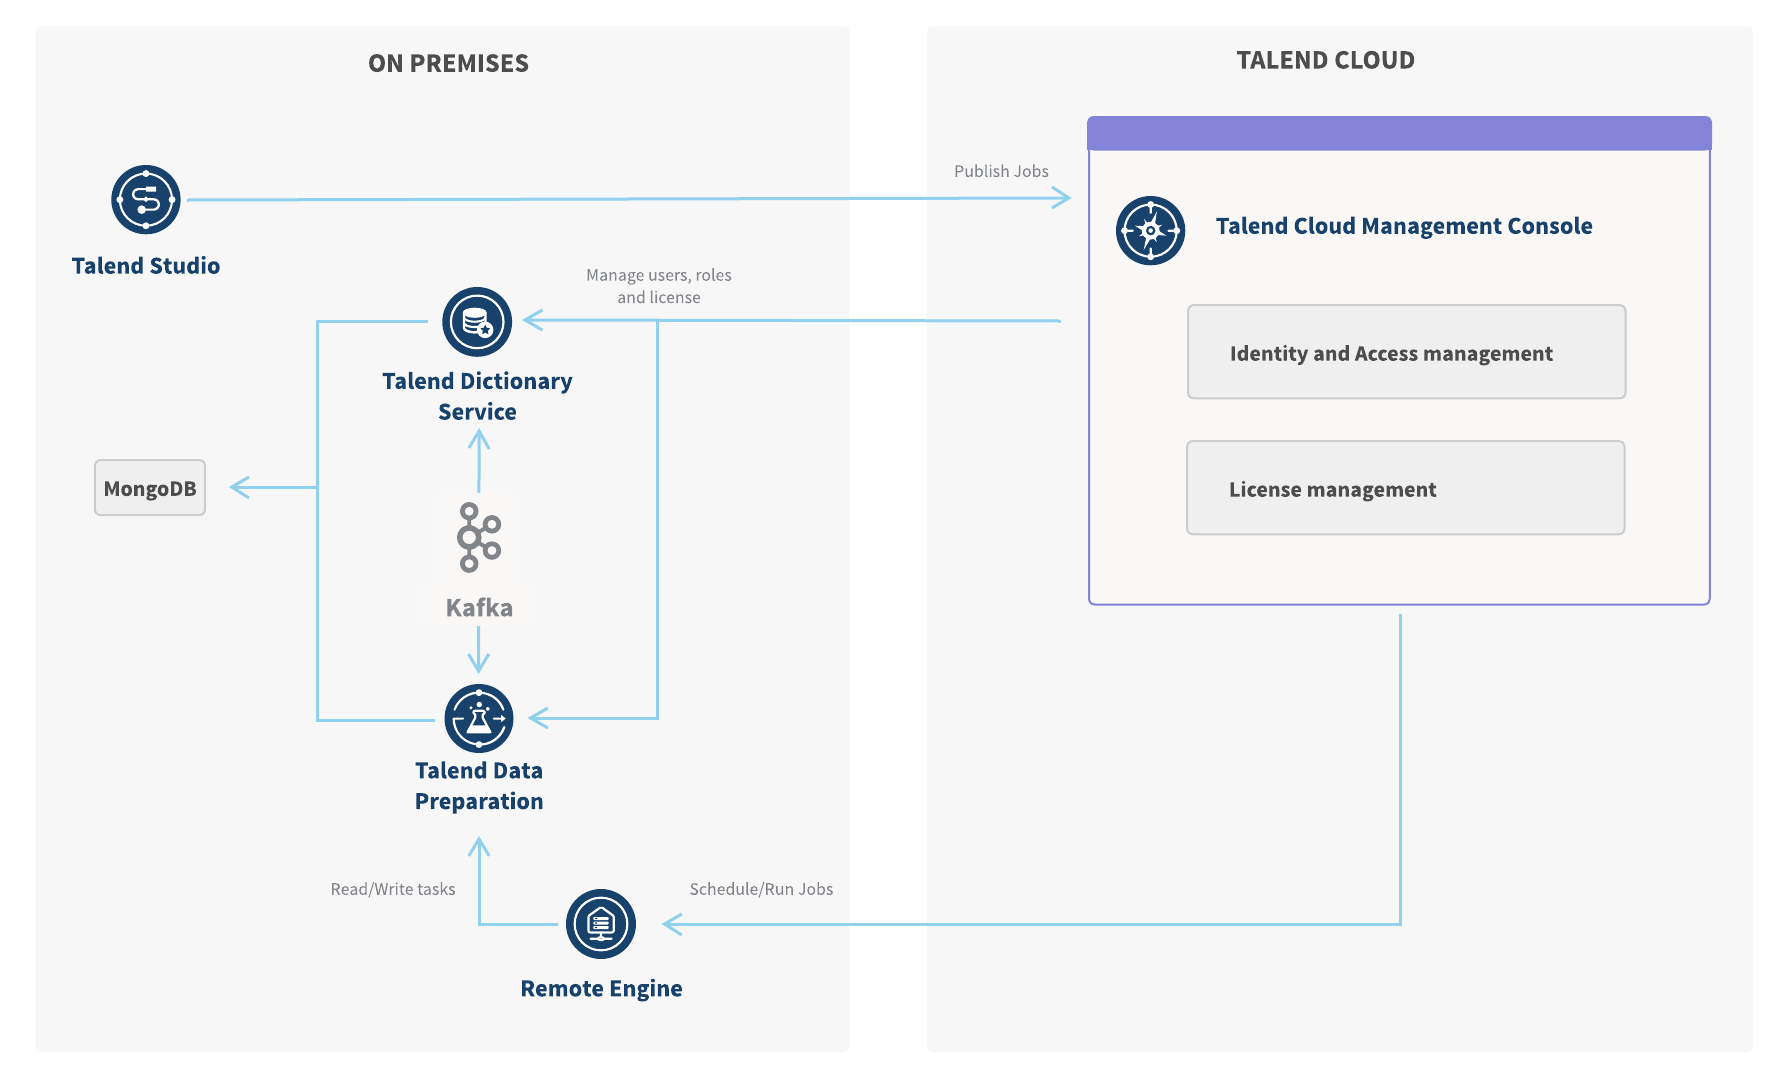 The diagram has two sections: on premises and Talend Cloud. In the on premises section, Talend Remote Engine receives Job run scheduling instructions from Talend Management Console, and reads and writes tasks to Talend Data Preparation. Talend Data Preparation communicates with Talend Dictionary Service using Kafka. In the Talend Cloud section, Talend Data Preparation users, roles, and license are managed from Talend Management Console.